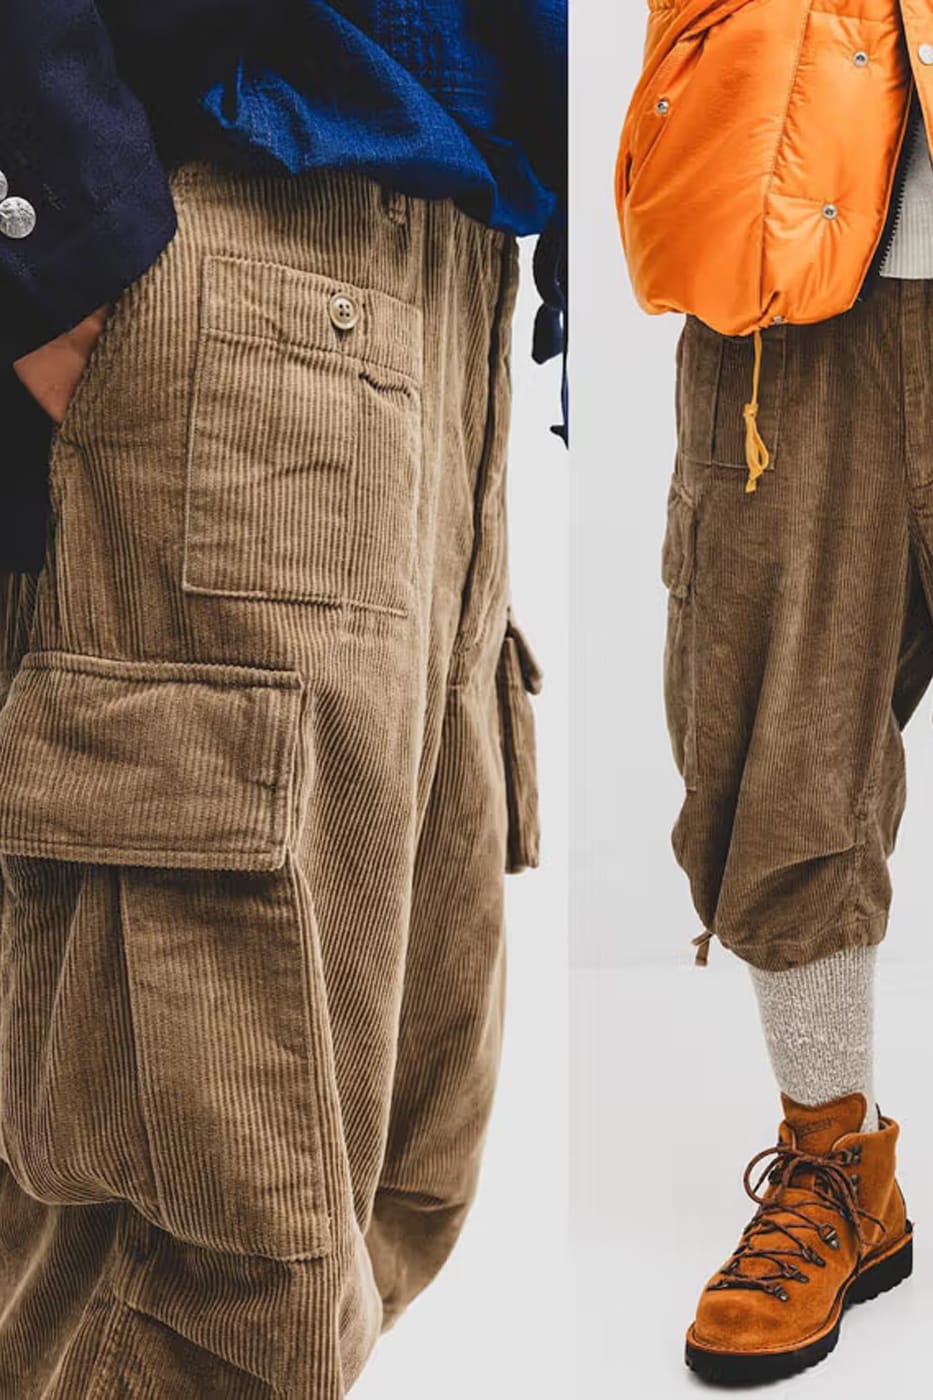 BEAMS PLUS and Engineered Garments Deliver Pocket-Packed Corduroy